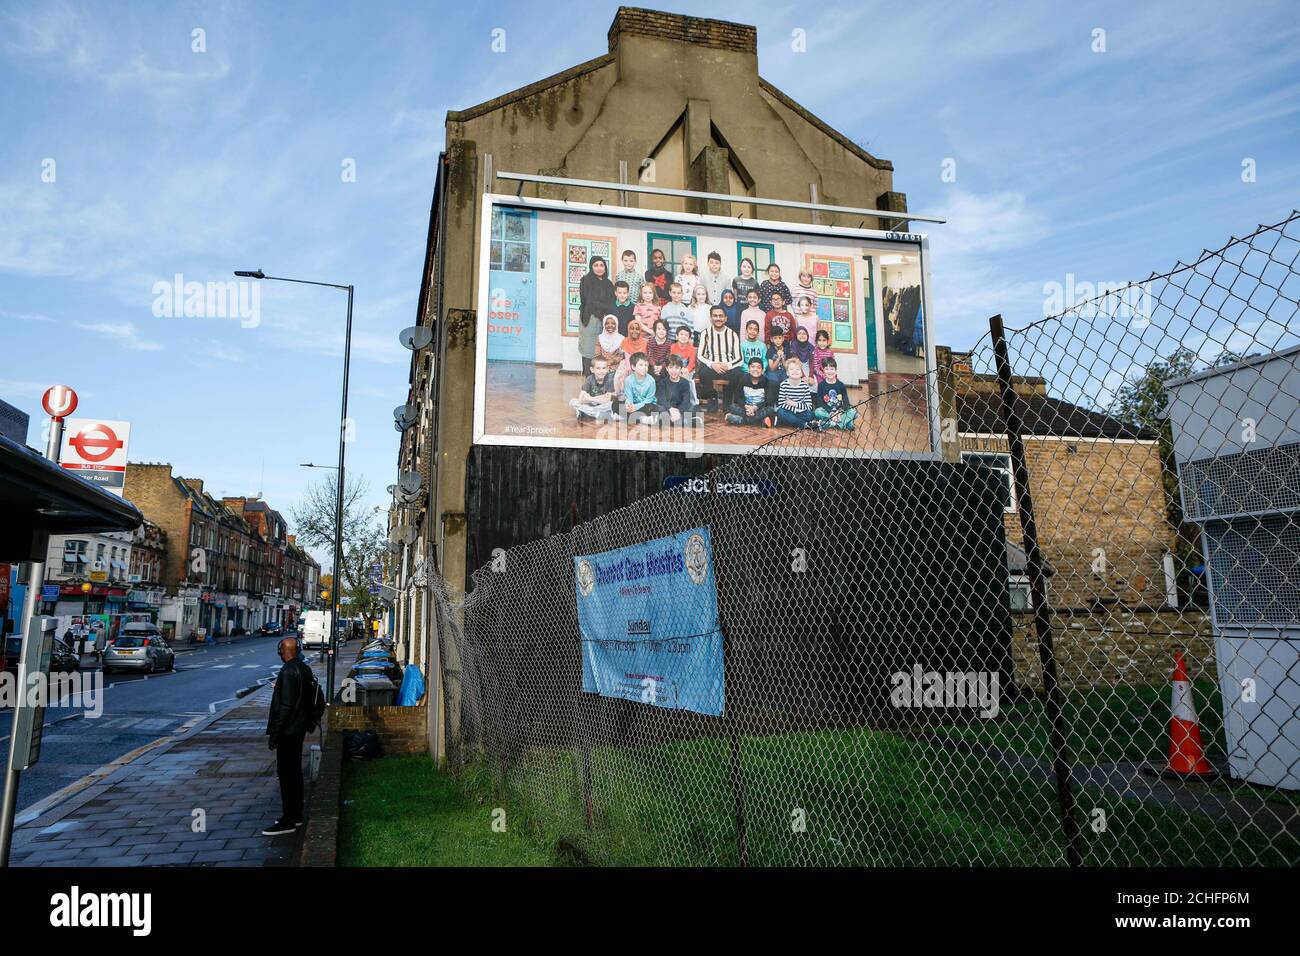 A billboard from the #Year3Project, created by London-born Turner Prize-winning artist and Oscar-winning filmmaker Steve McQueen in partnership with Tate Britain, Artangel and A New Direction, which launches this week, Harrow Road in London. Stock Photo